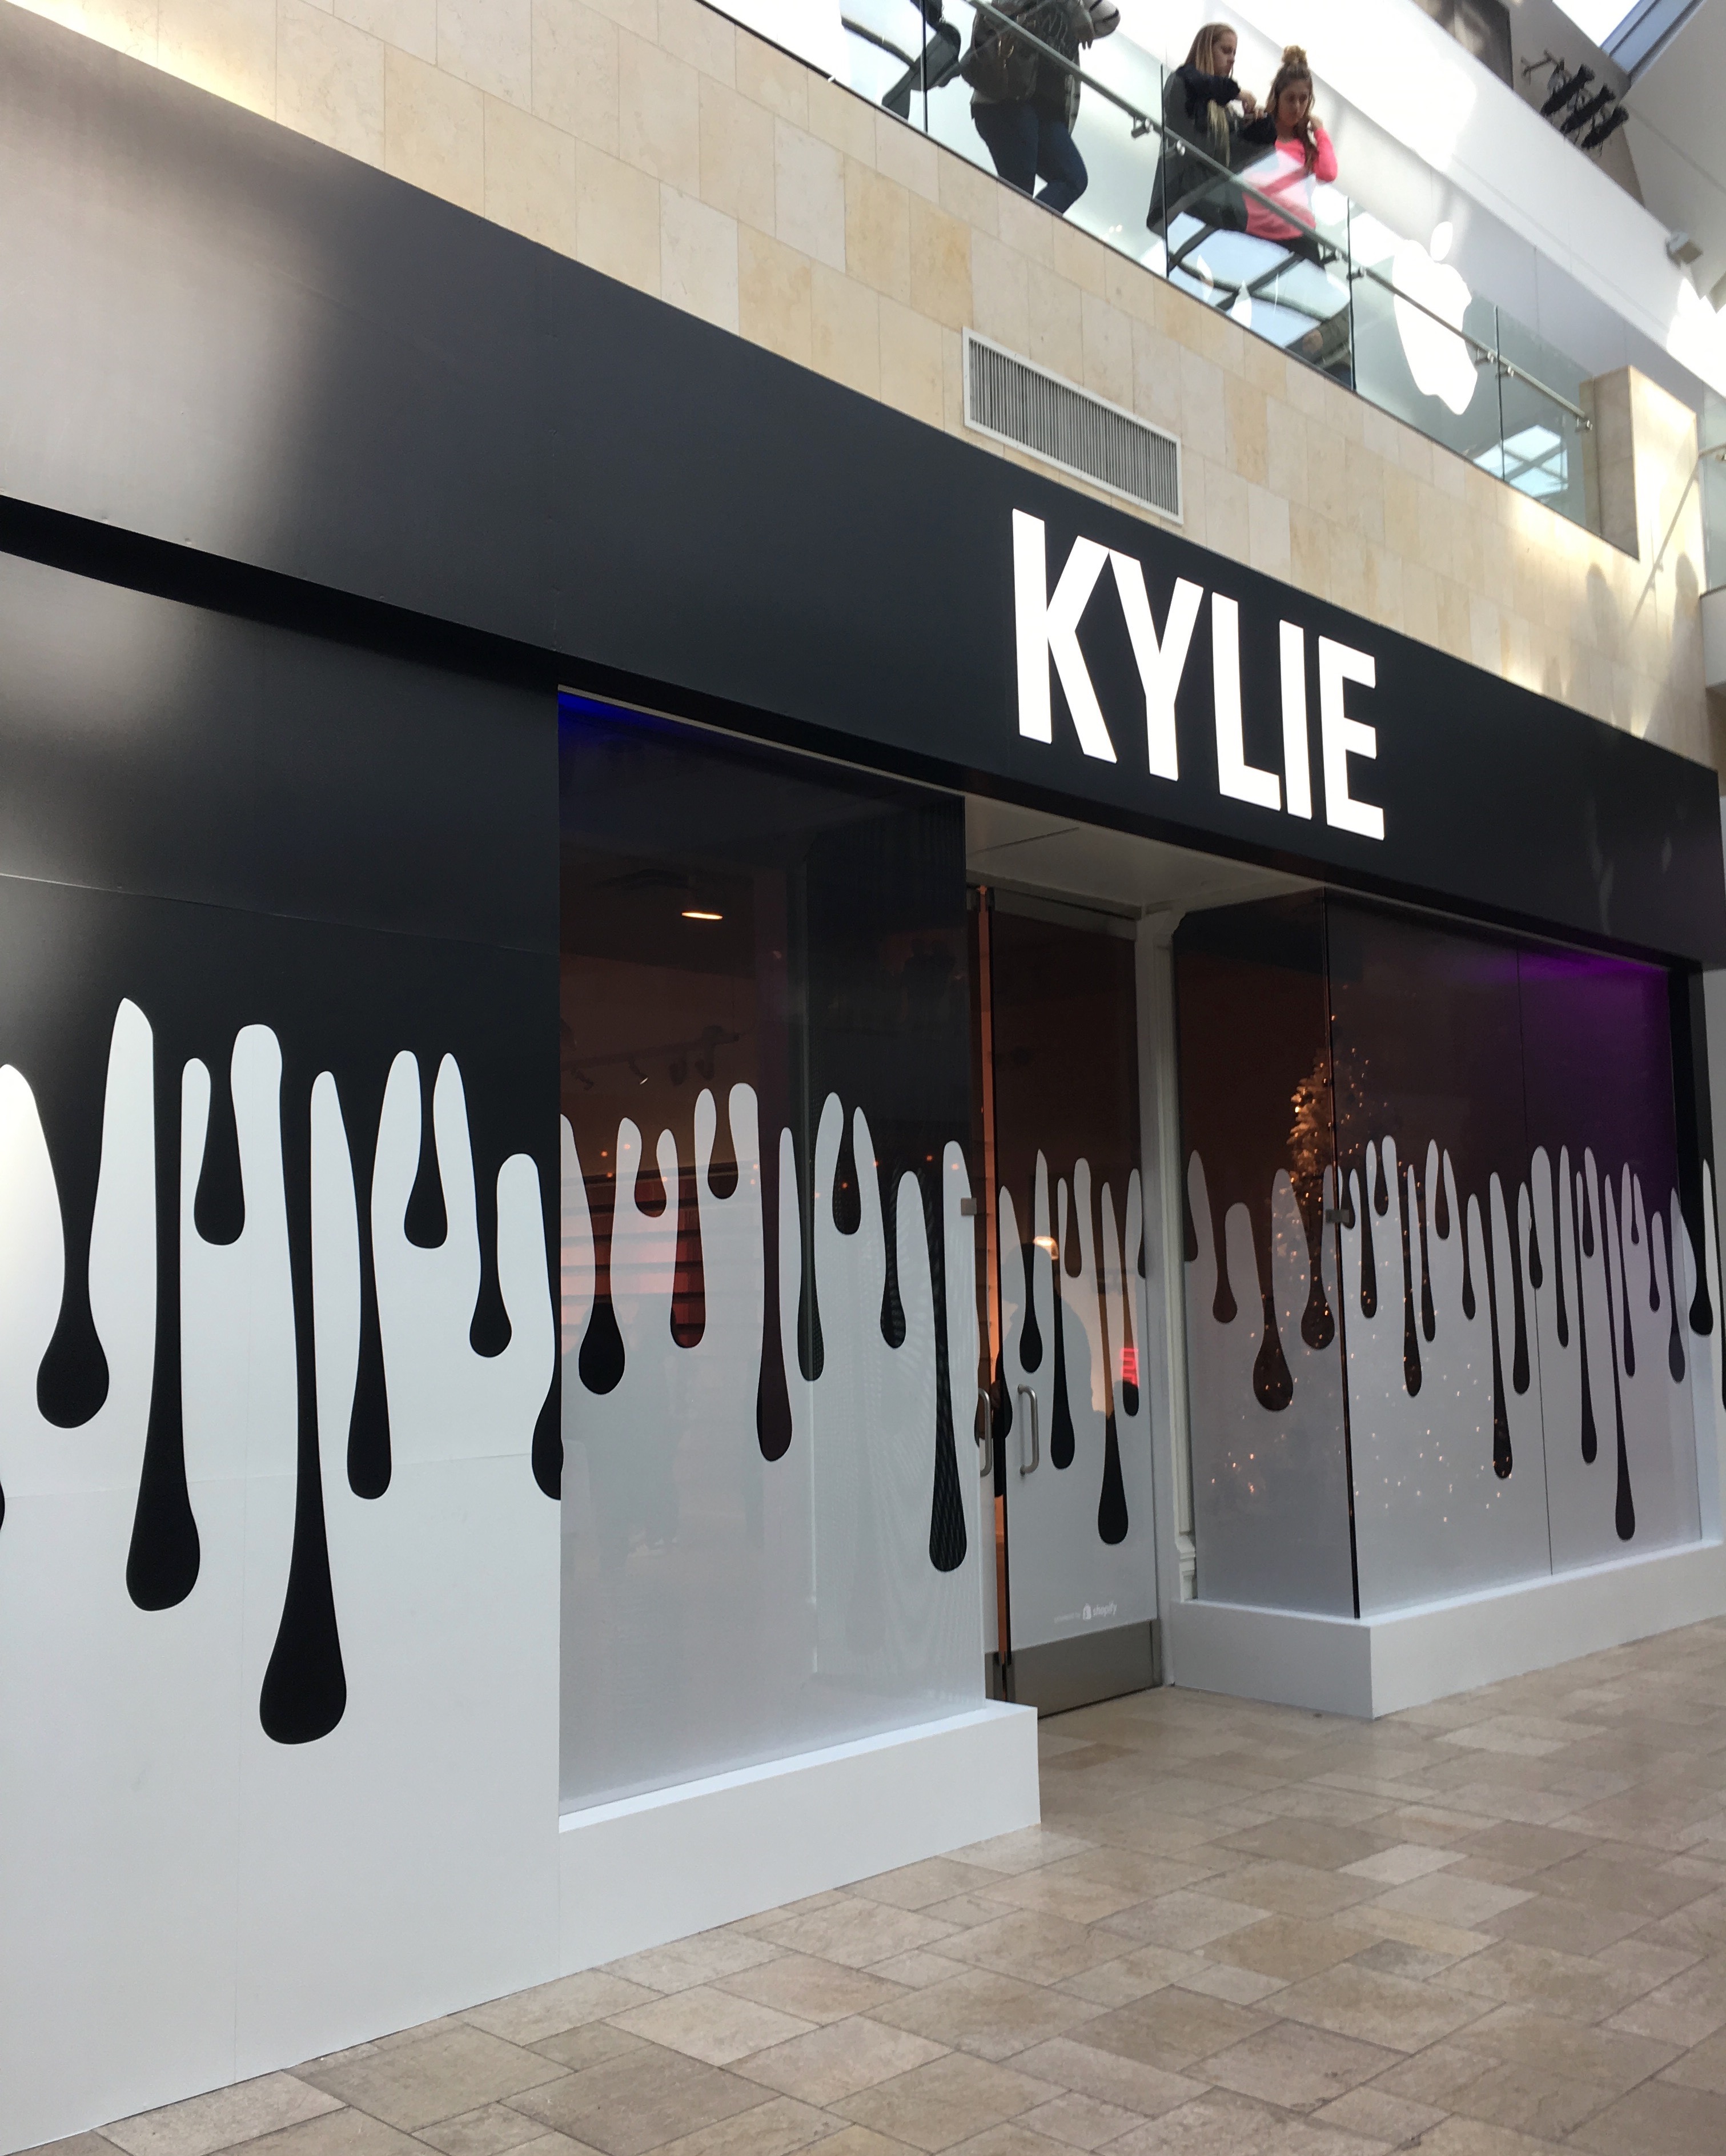 5 Must-Haves From Kylie Jenner's Shop at the Topanga Mall in LA